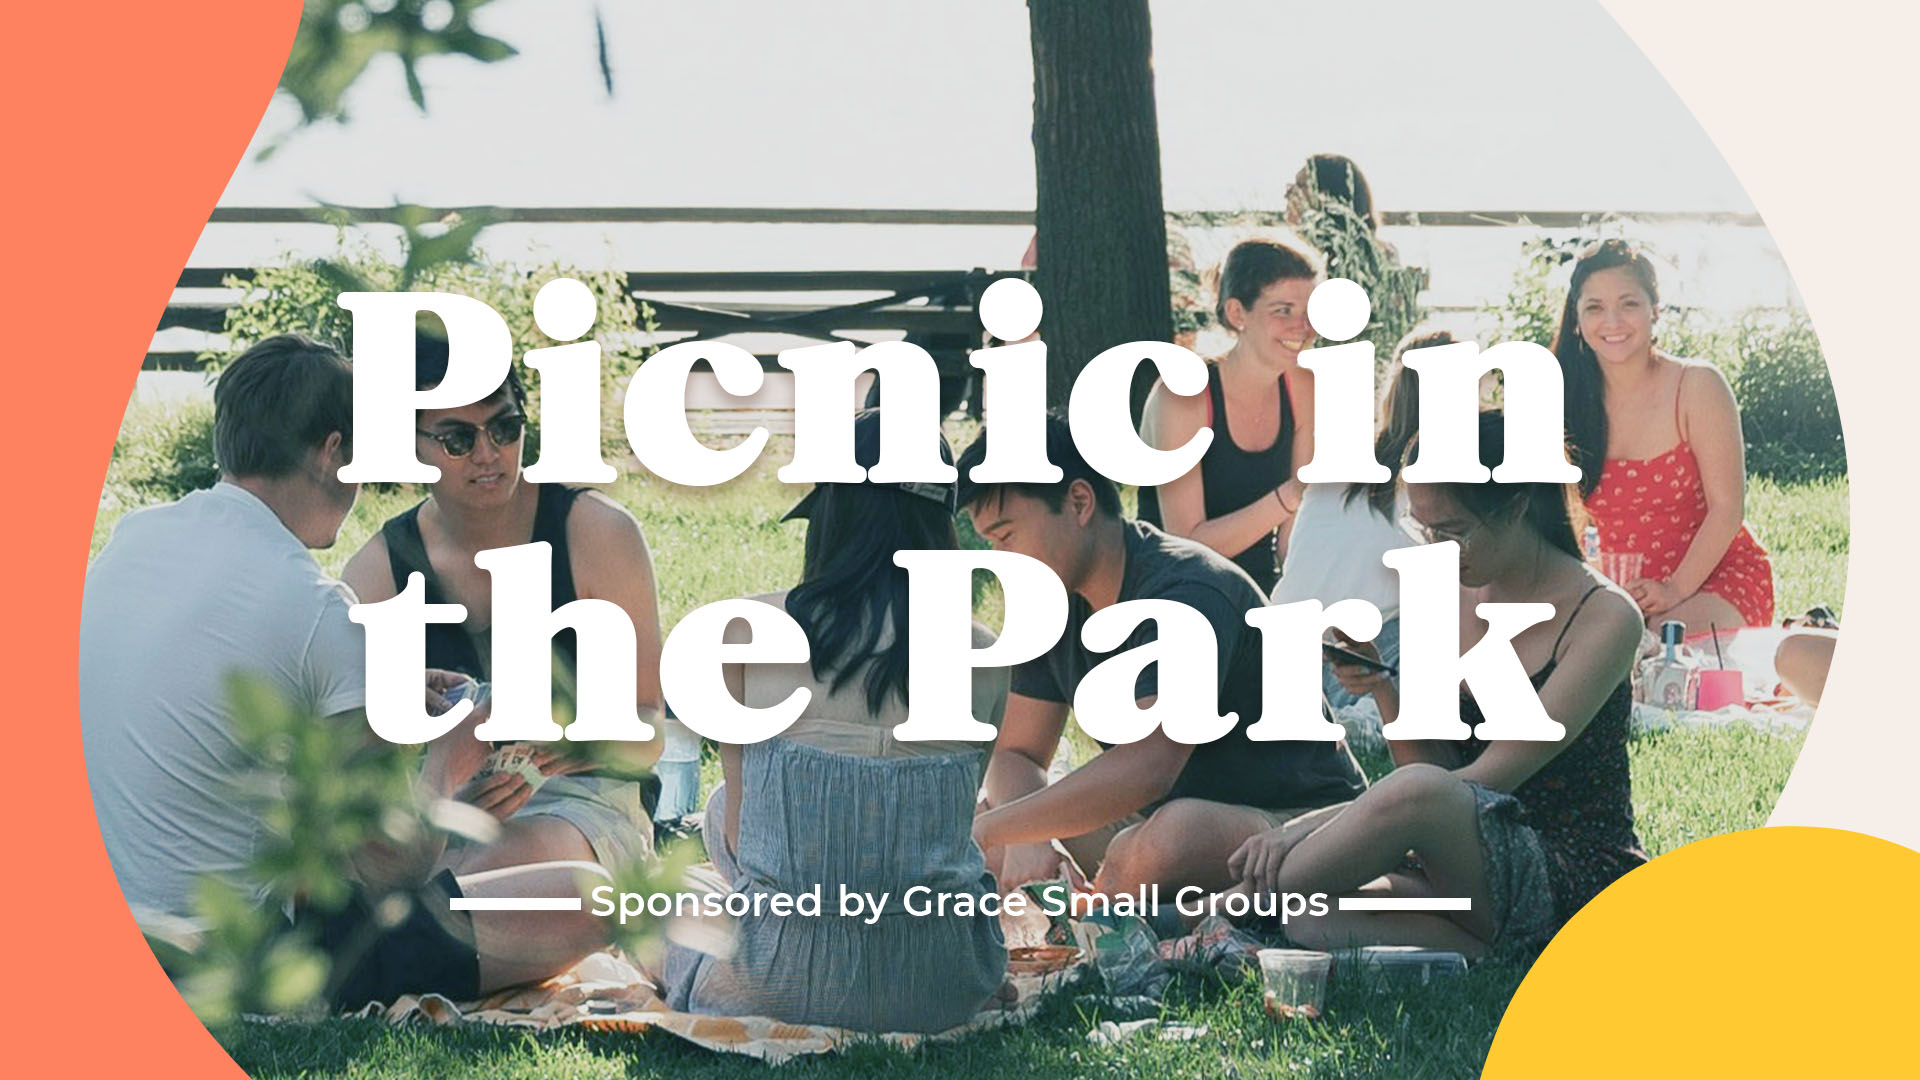 Picnic in the Park

Sunday | 12:30pm - 3:30pm
July 7
